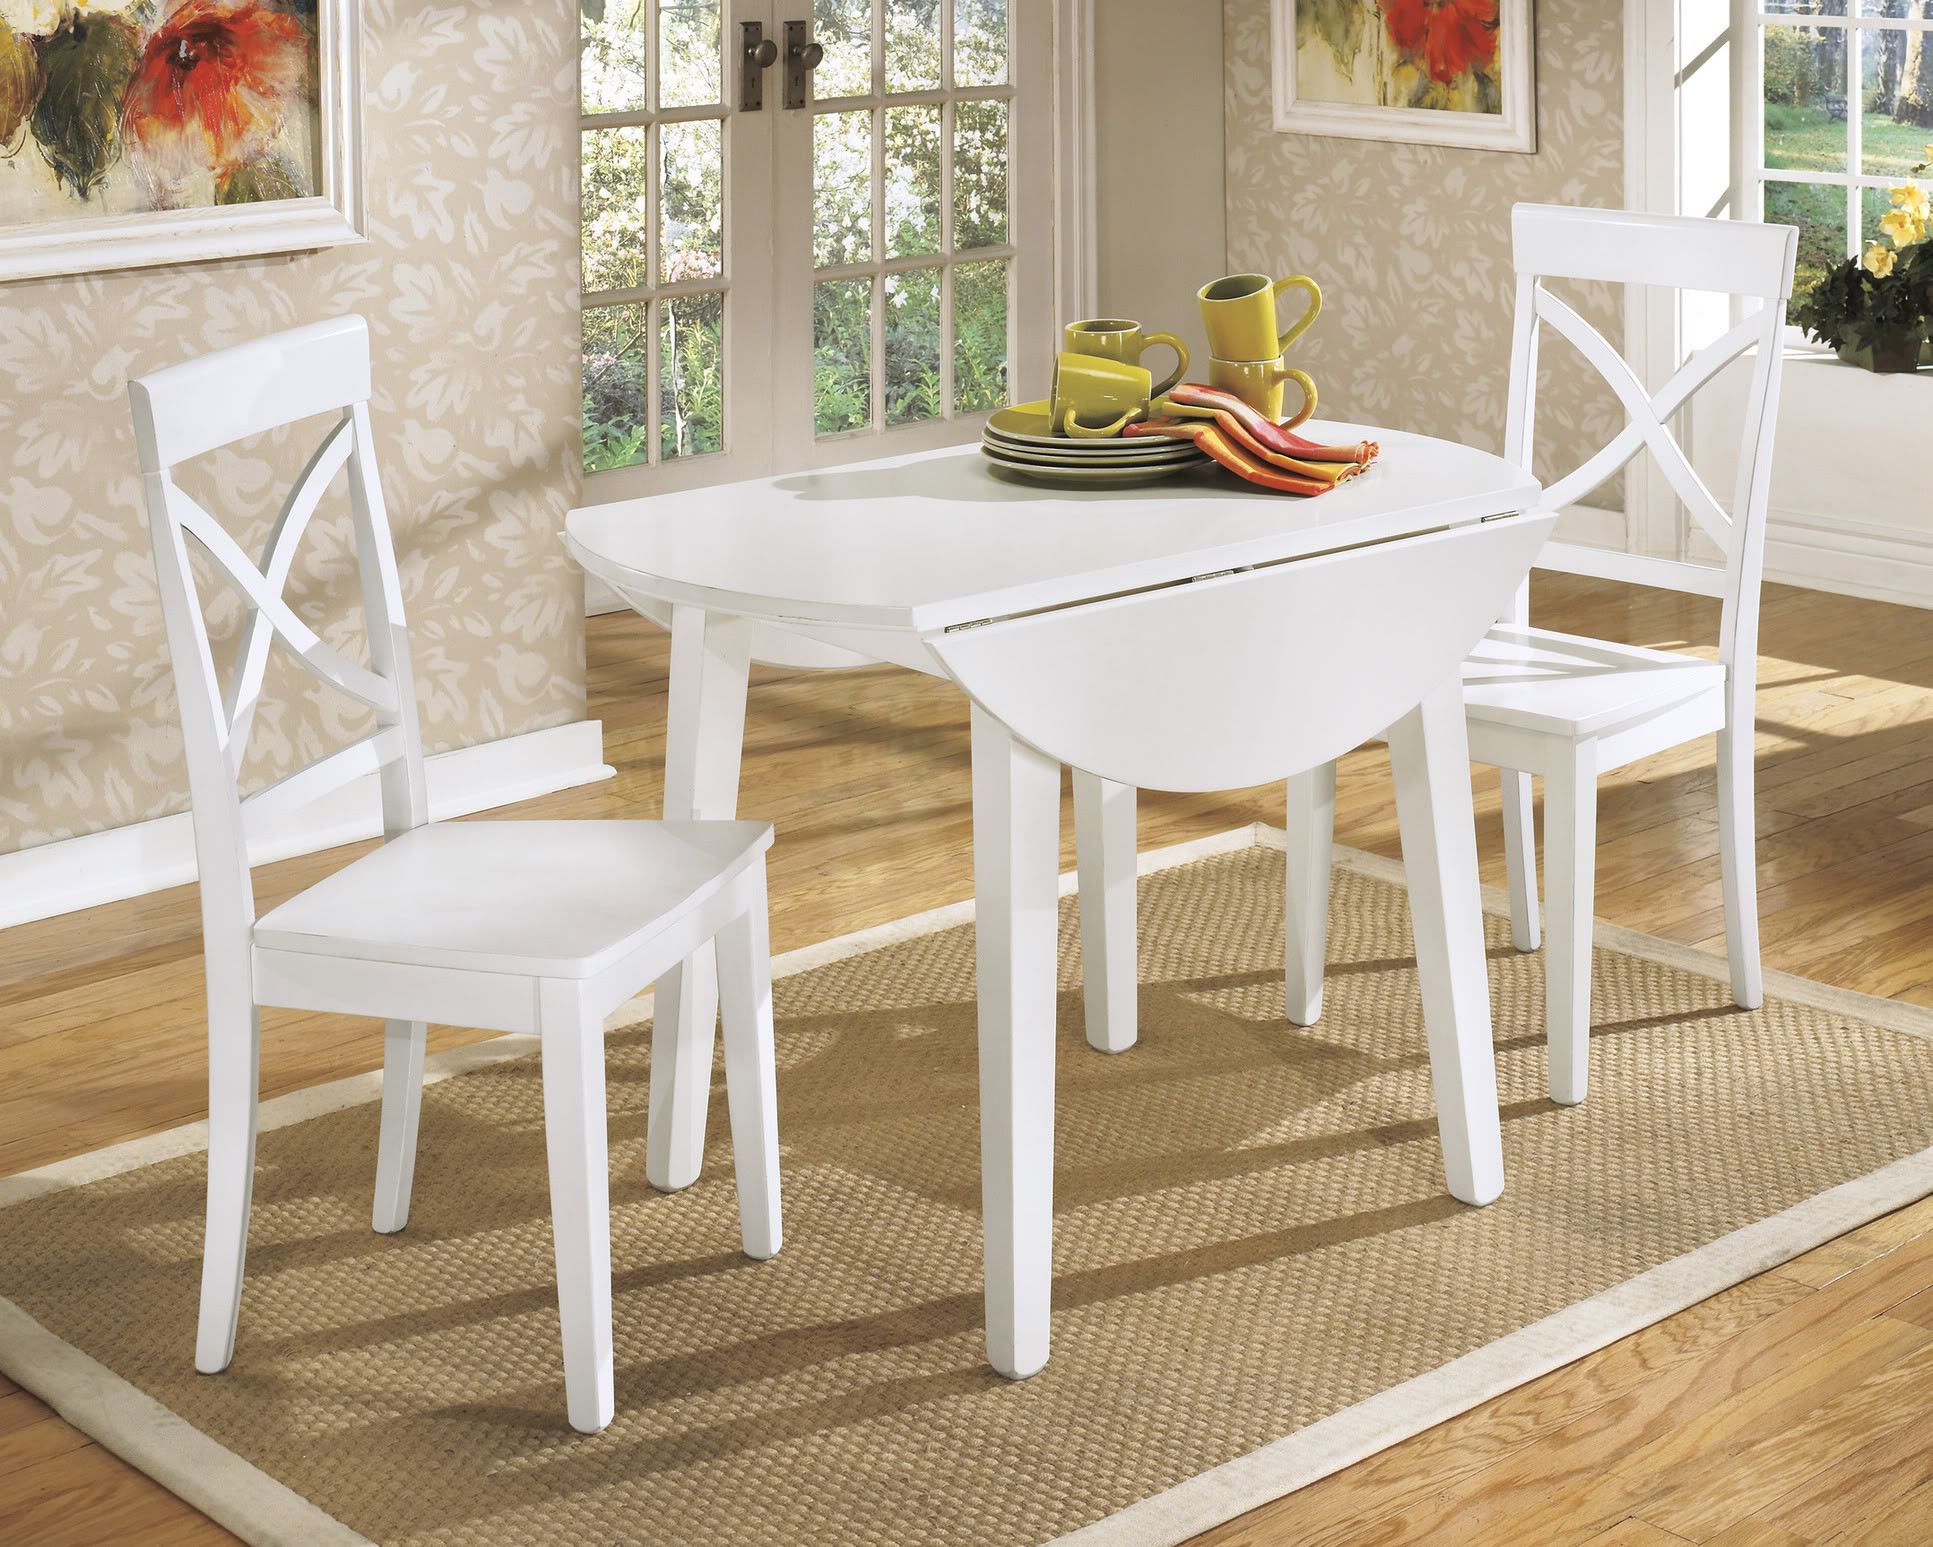 Small Round Kitchen Table
 White Round Kitchen Table and Chairs Design – HomesFeed